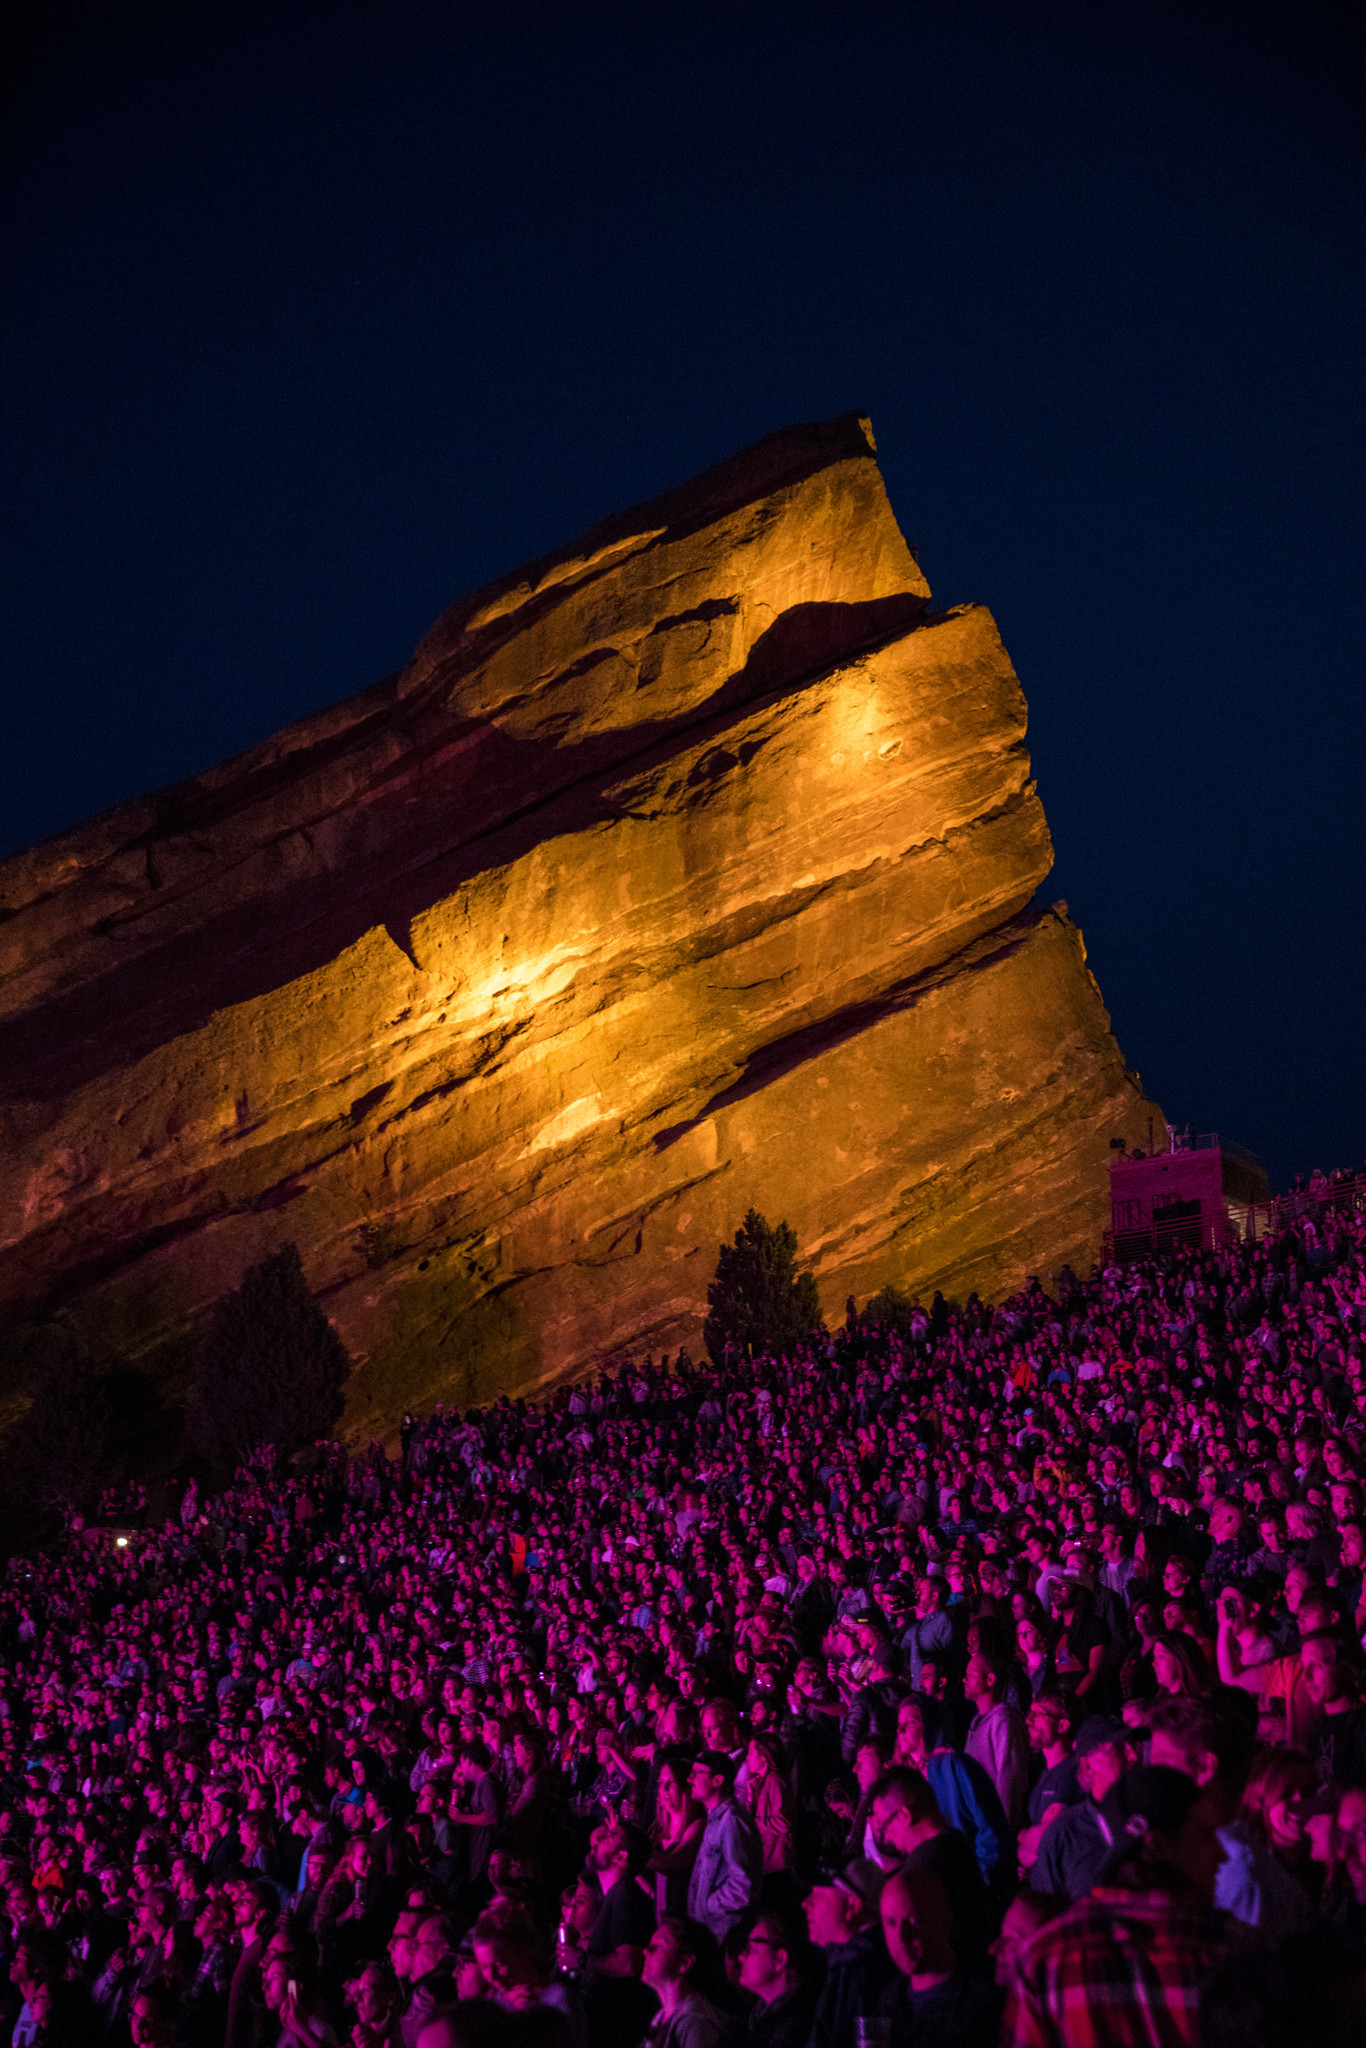 MORRISON, COLO. - MAY 21: Fans listen as Phantogram/Tycho performs at the Red Rocks Amphitheatre, o